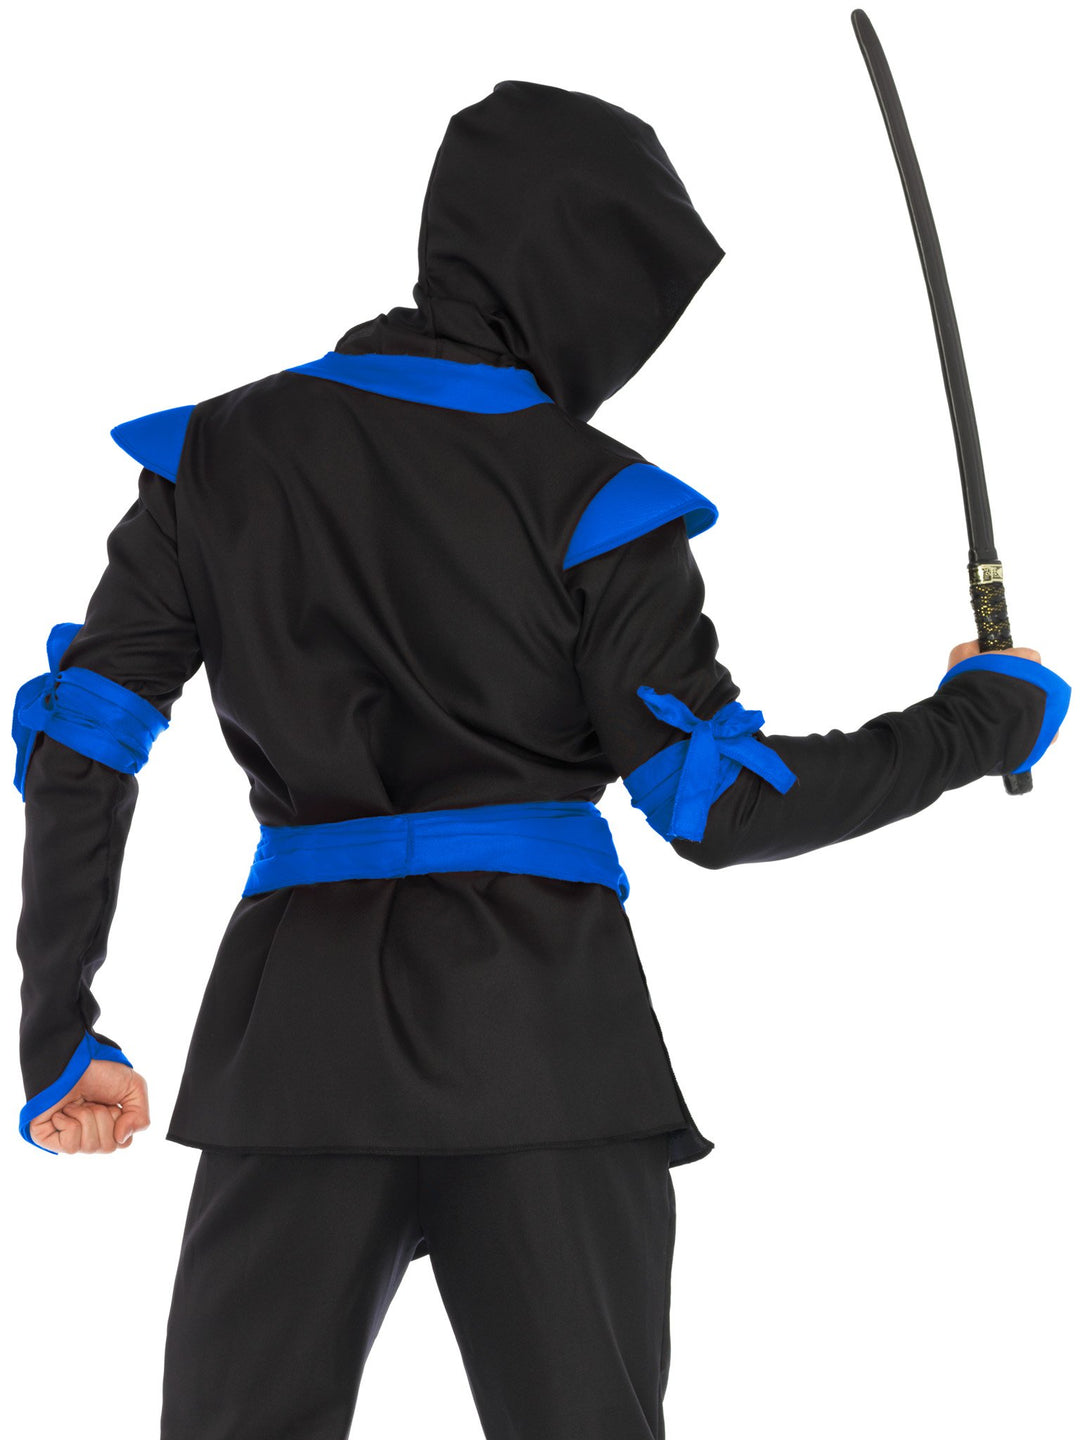 Ninja Warrior Costume with Attached Wraps and Detachable Hood